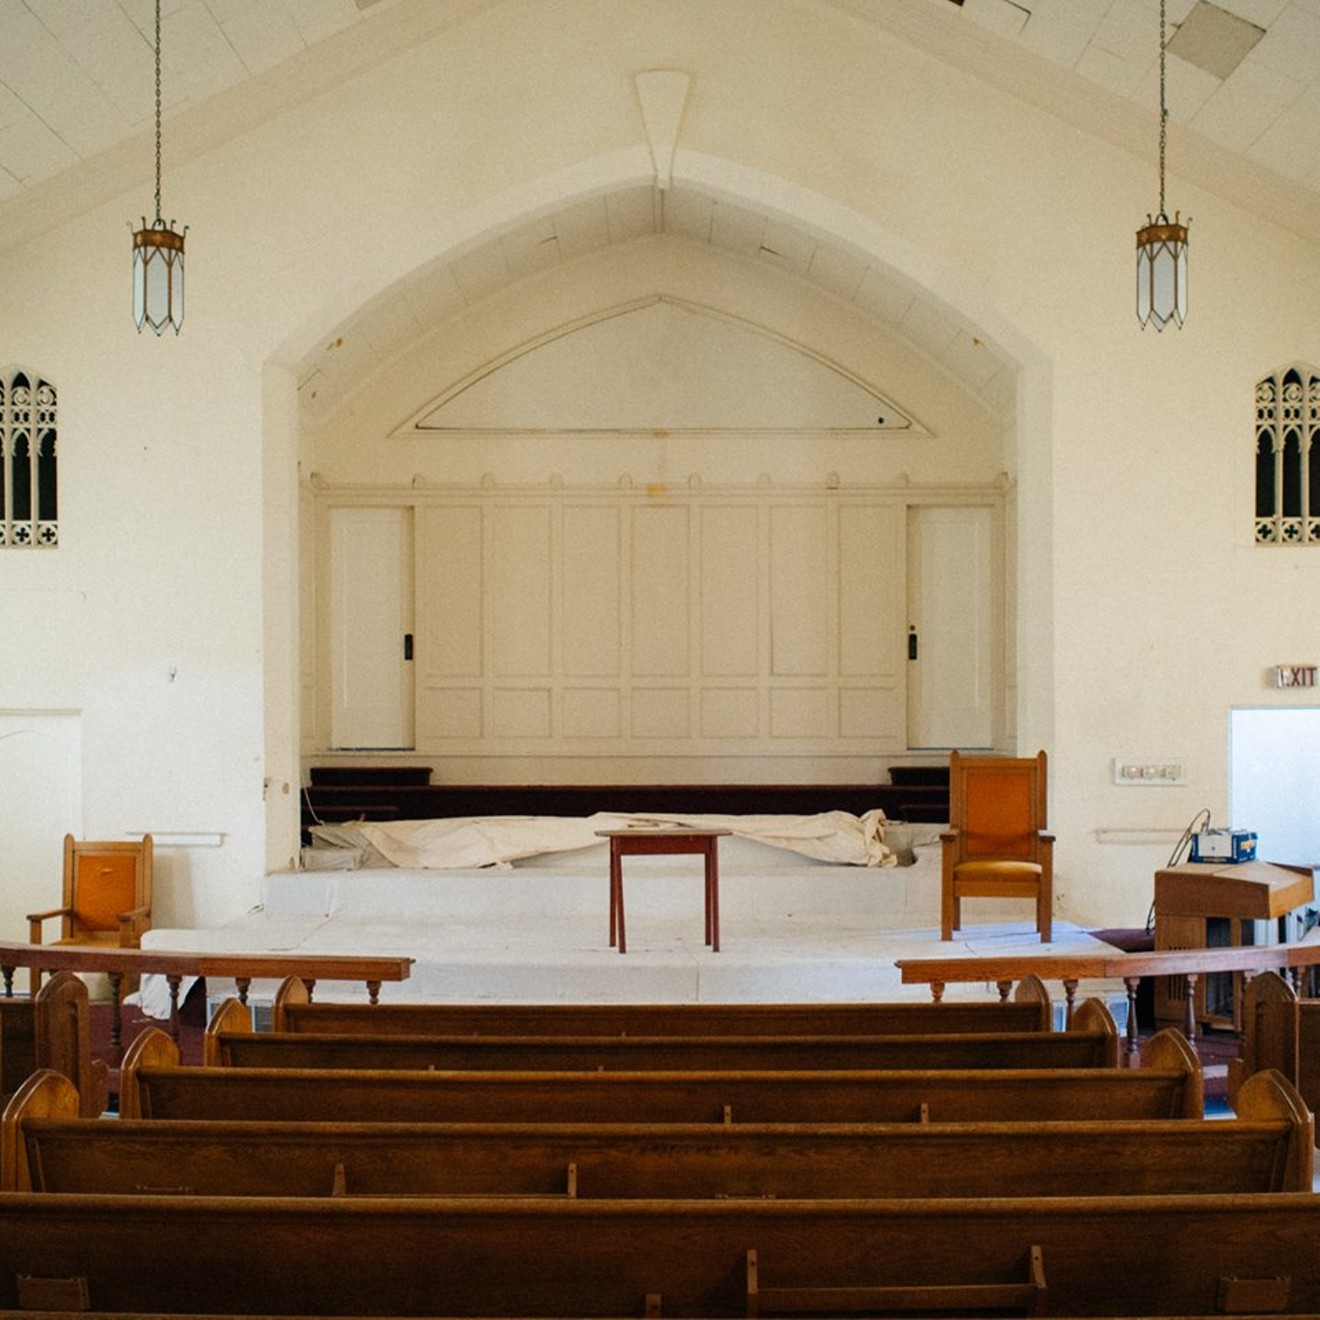 The Arts Mission Oak Cliff, a church that has been repurposed as an arts space, will give anonymous monologues by women with a confessional feel.